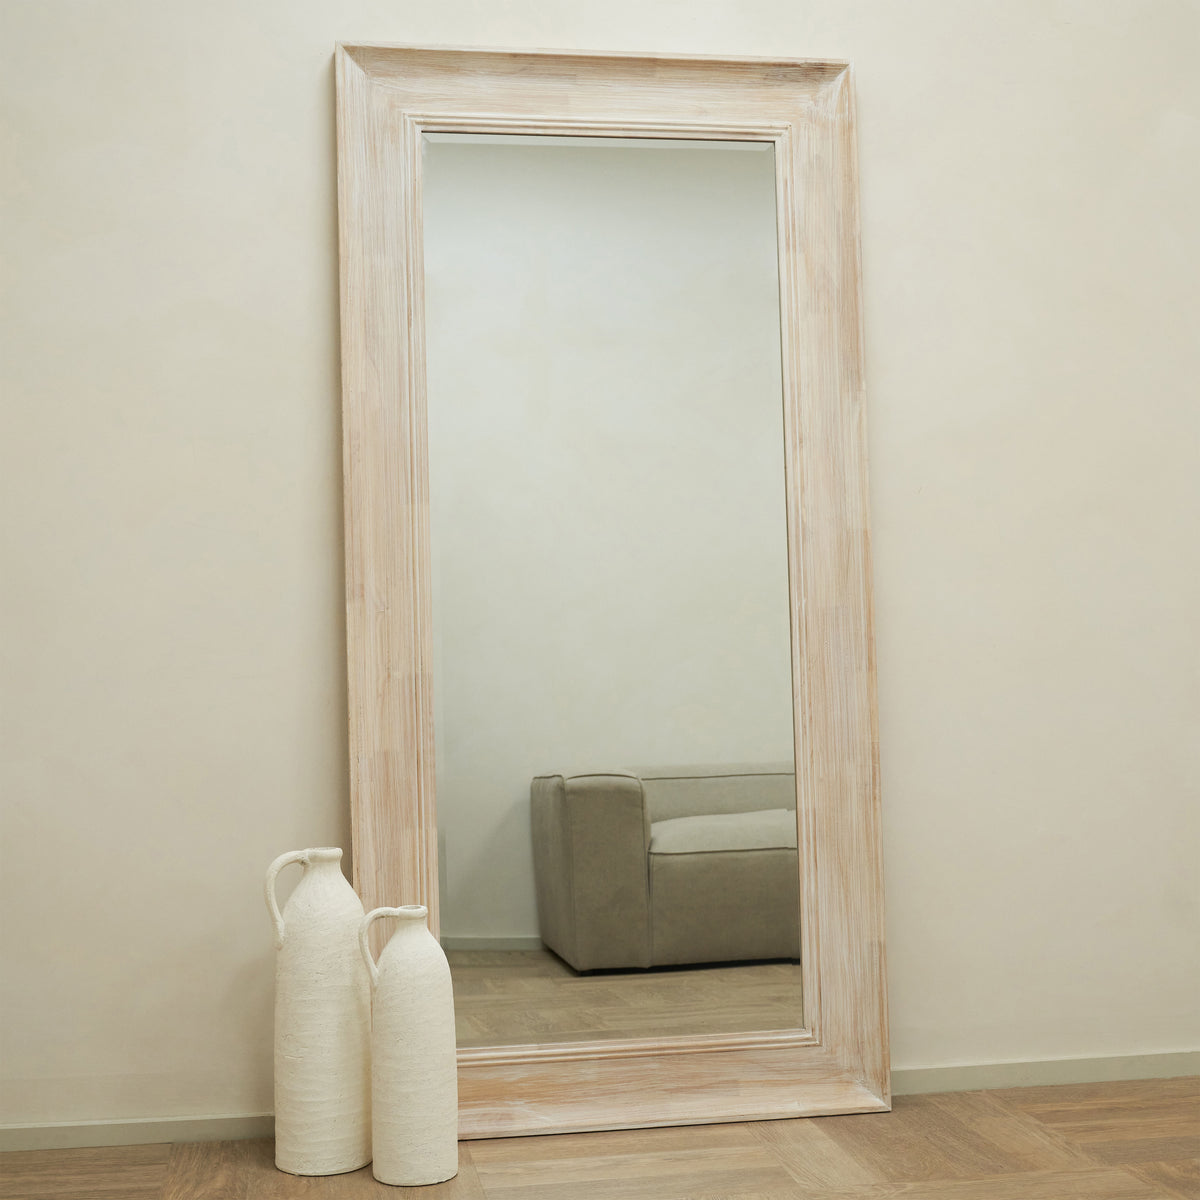 White washed wood full length mirror leaning against wall